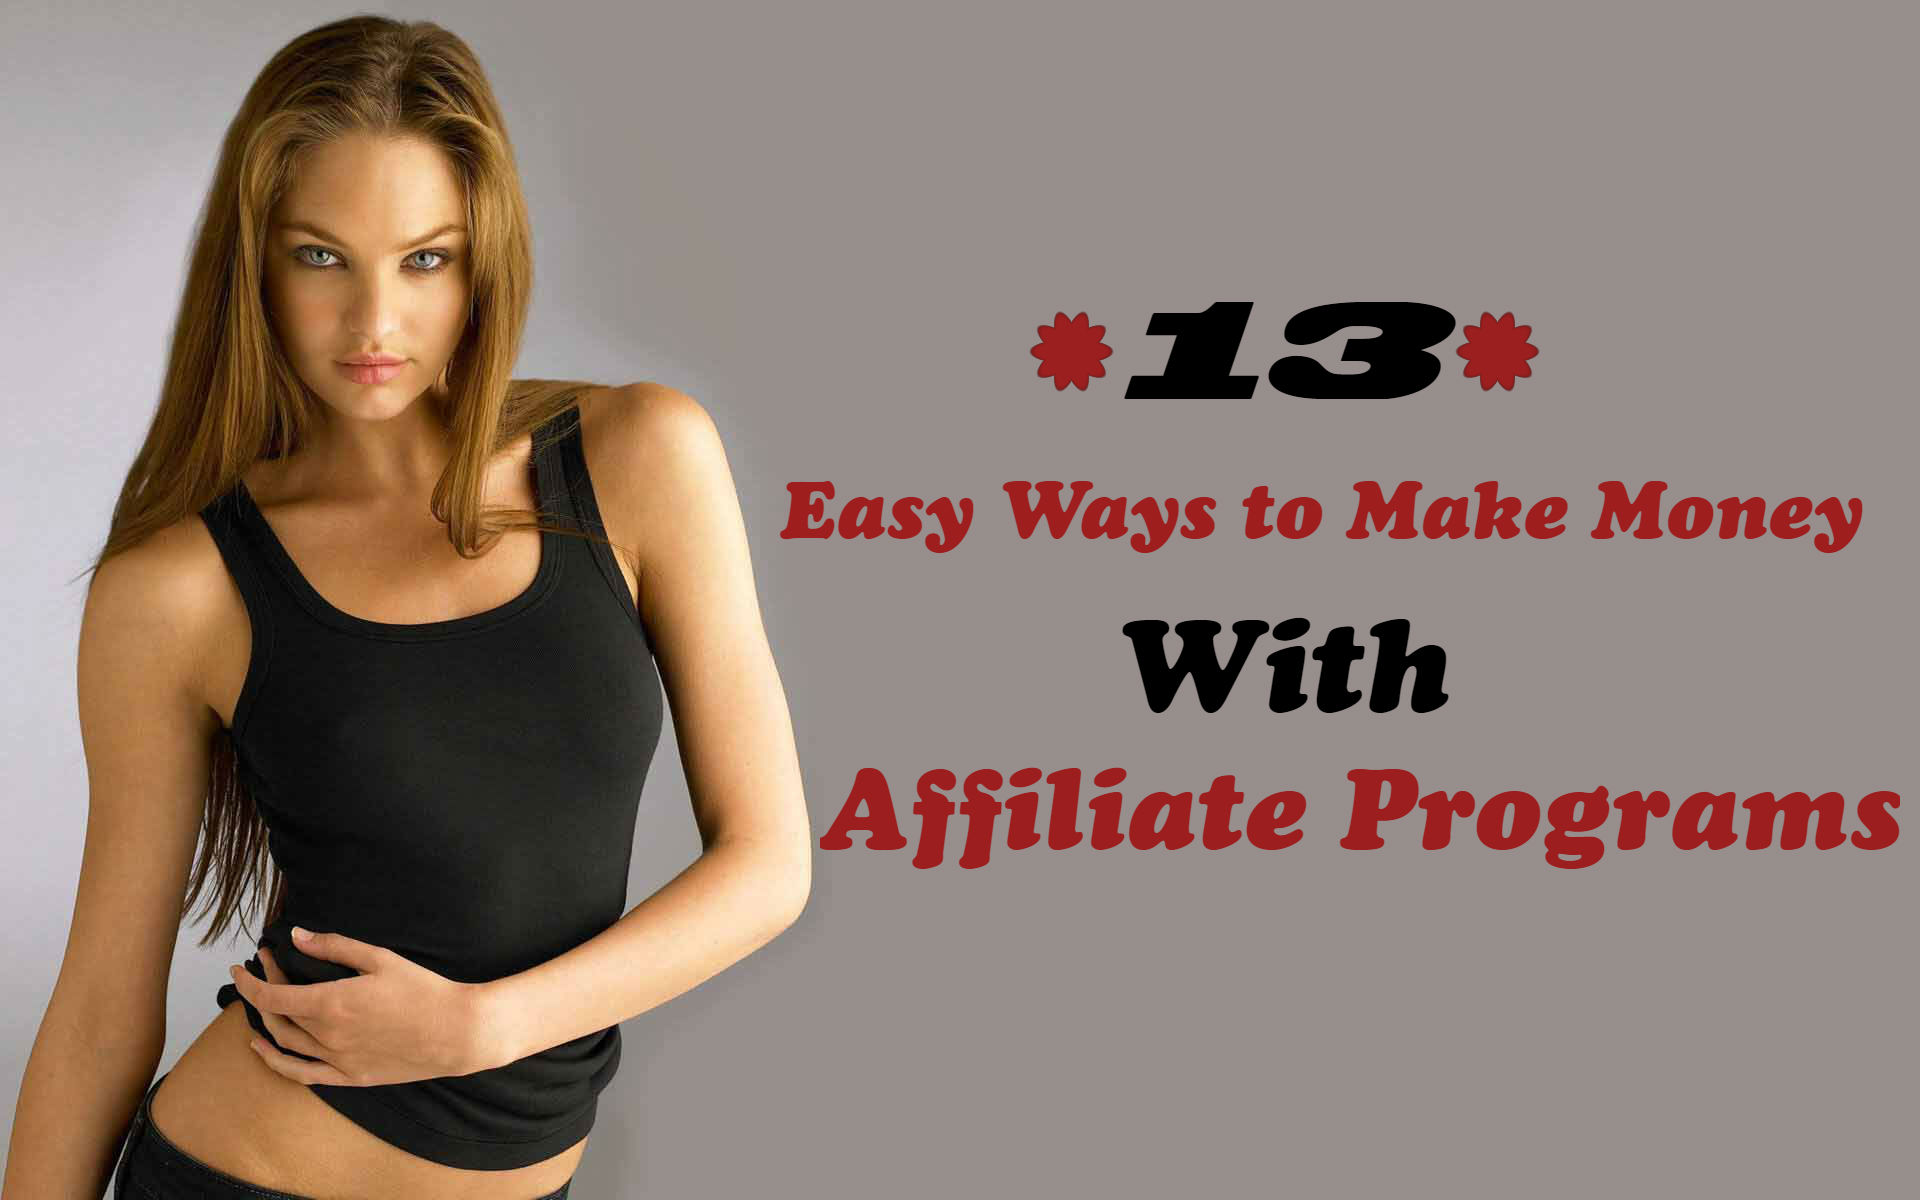 Easy Ways to Make Money With Affiliate Programs